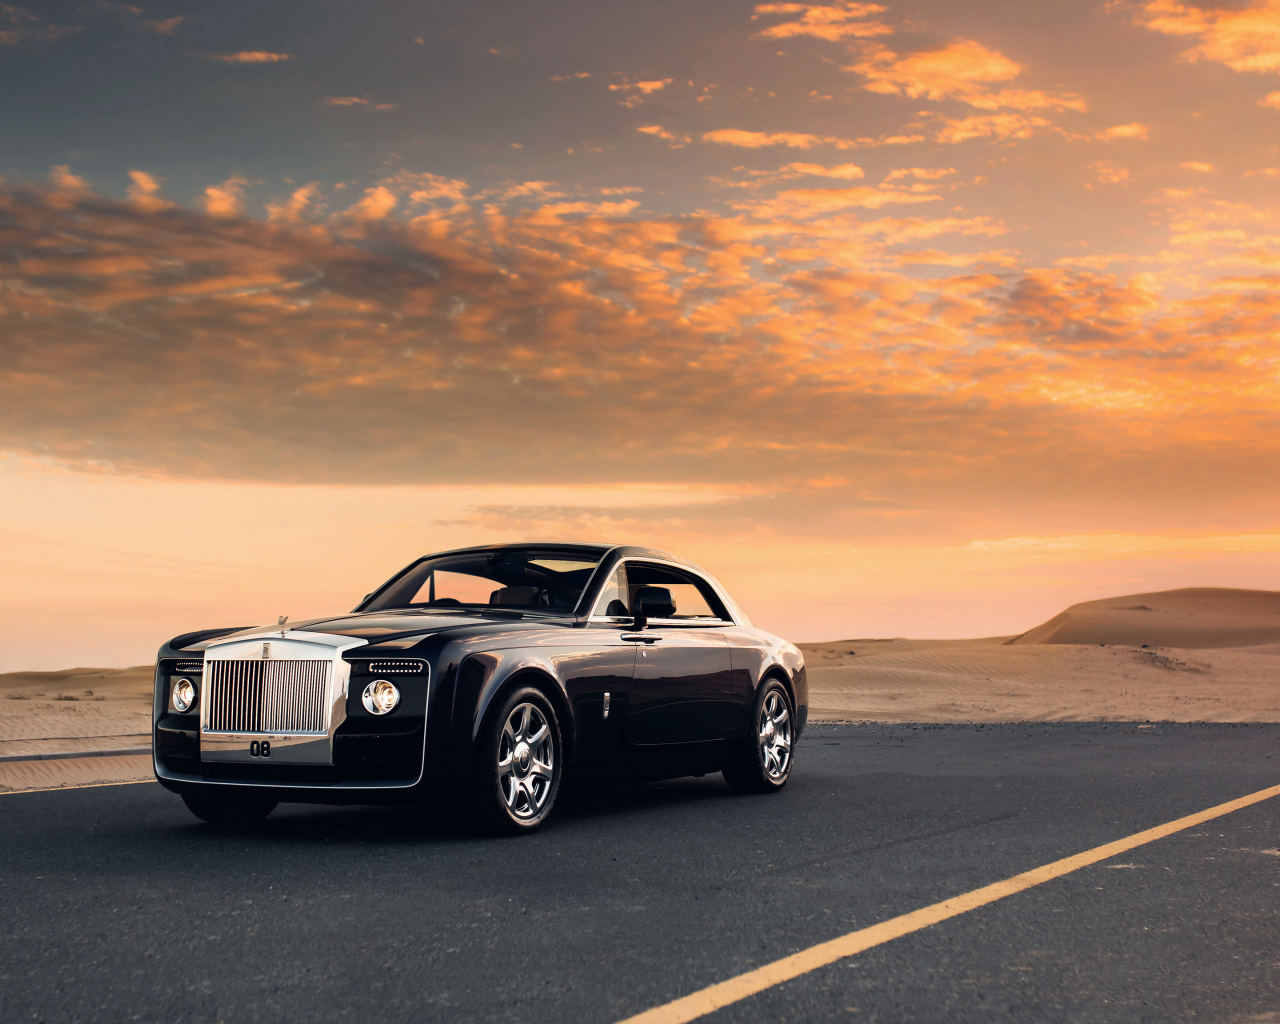 Black Rolls Royce Sweptail on a background of beautiful sky